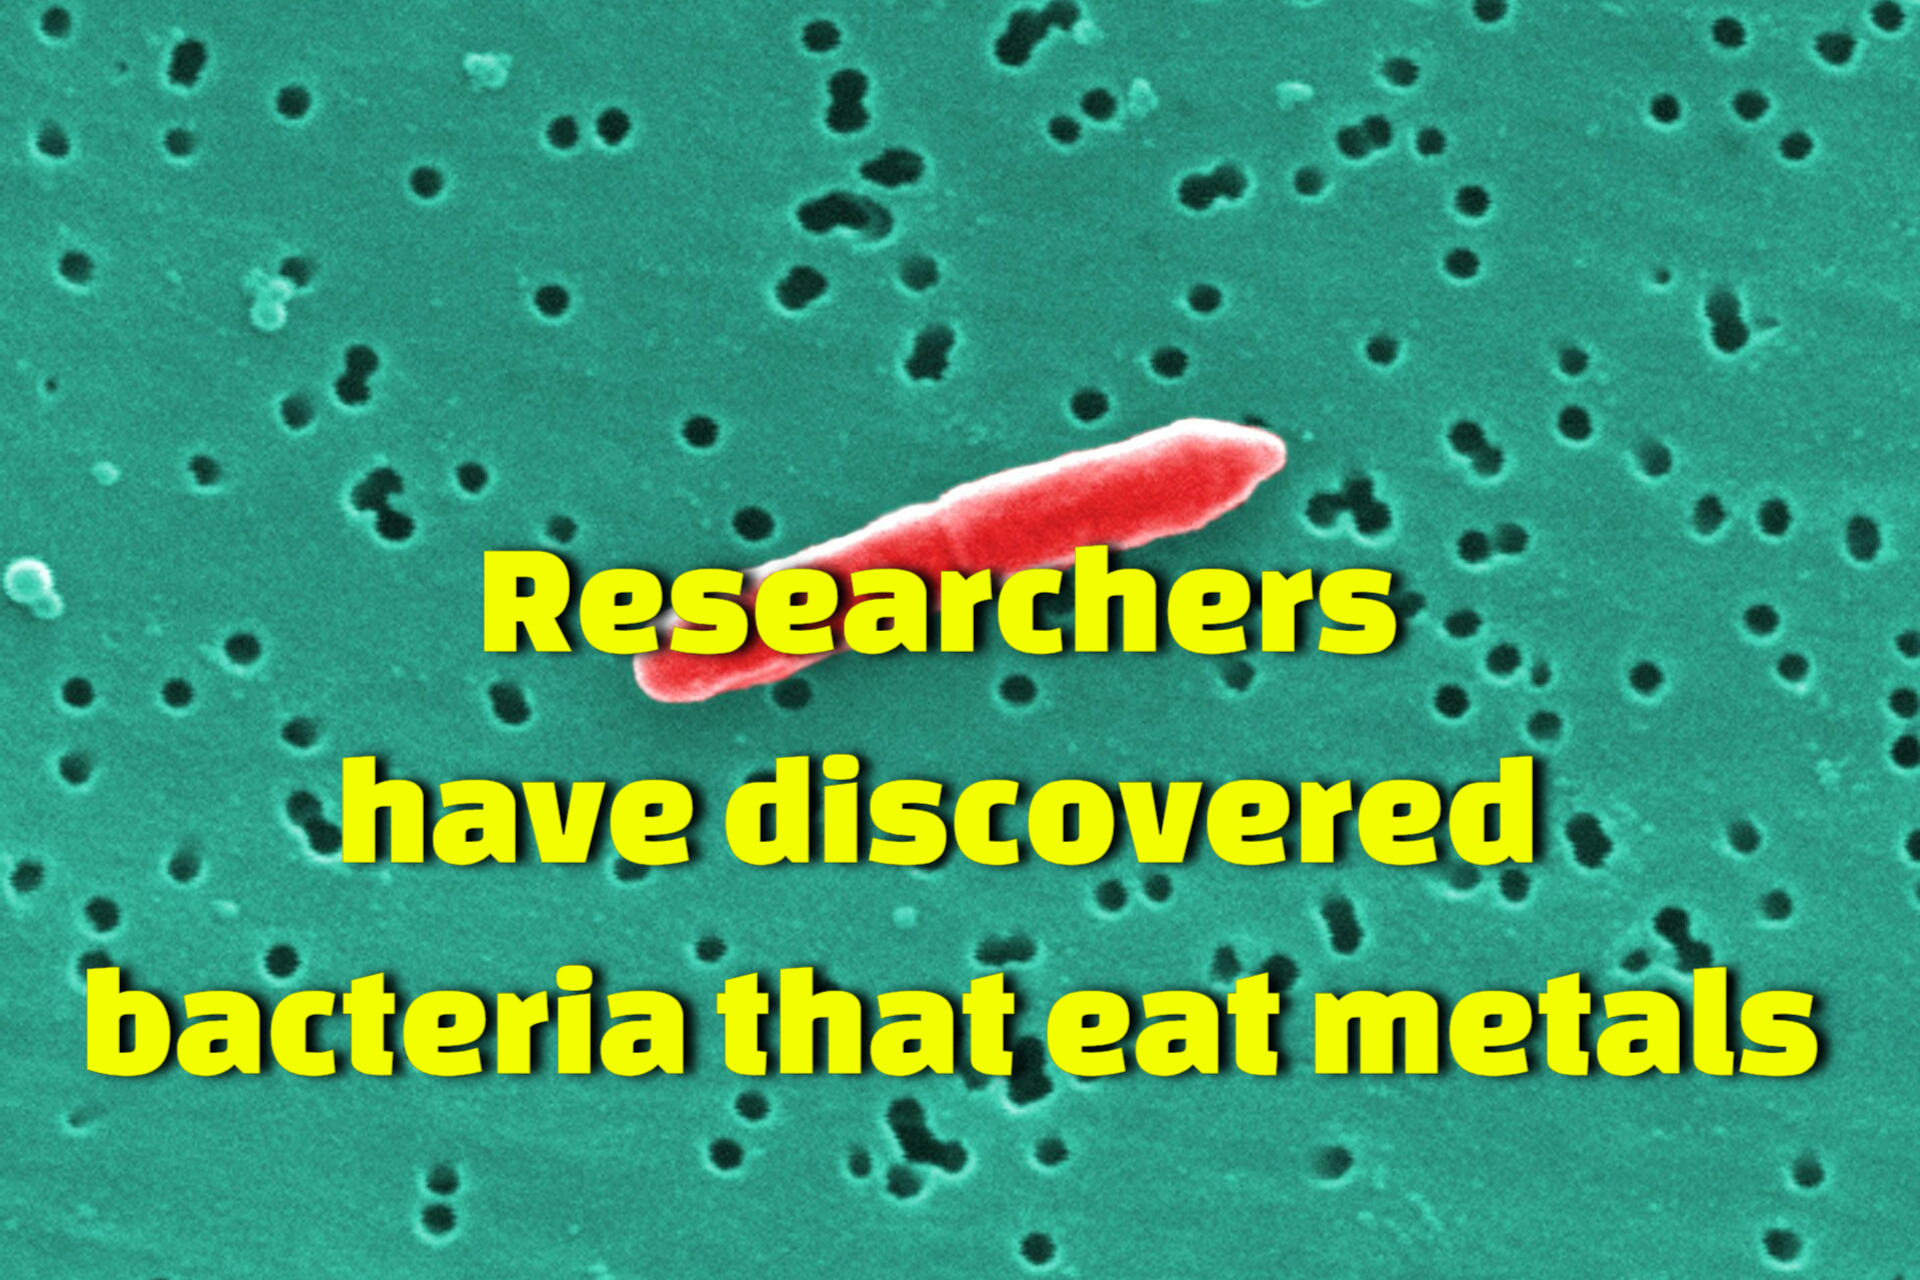 Researchers at Banaras Hindu University have discovered new bacteria that eat metal